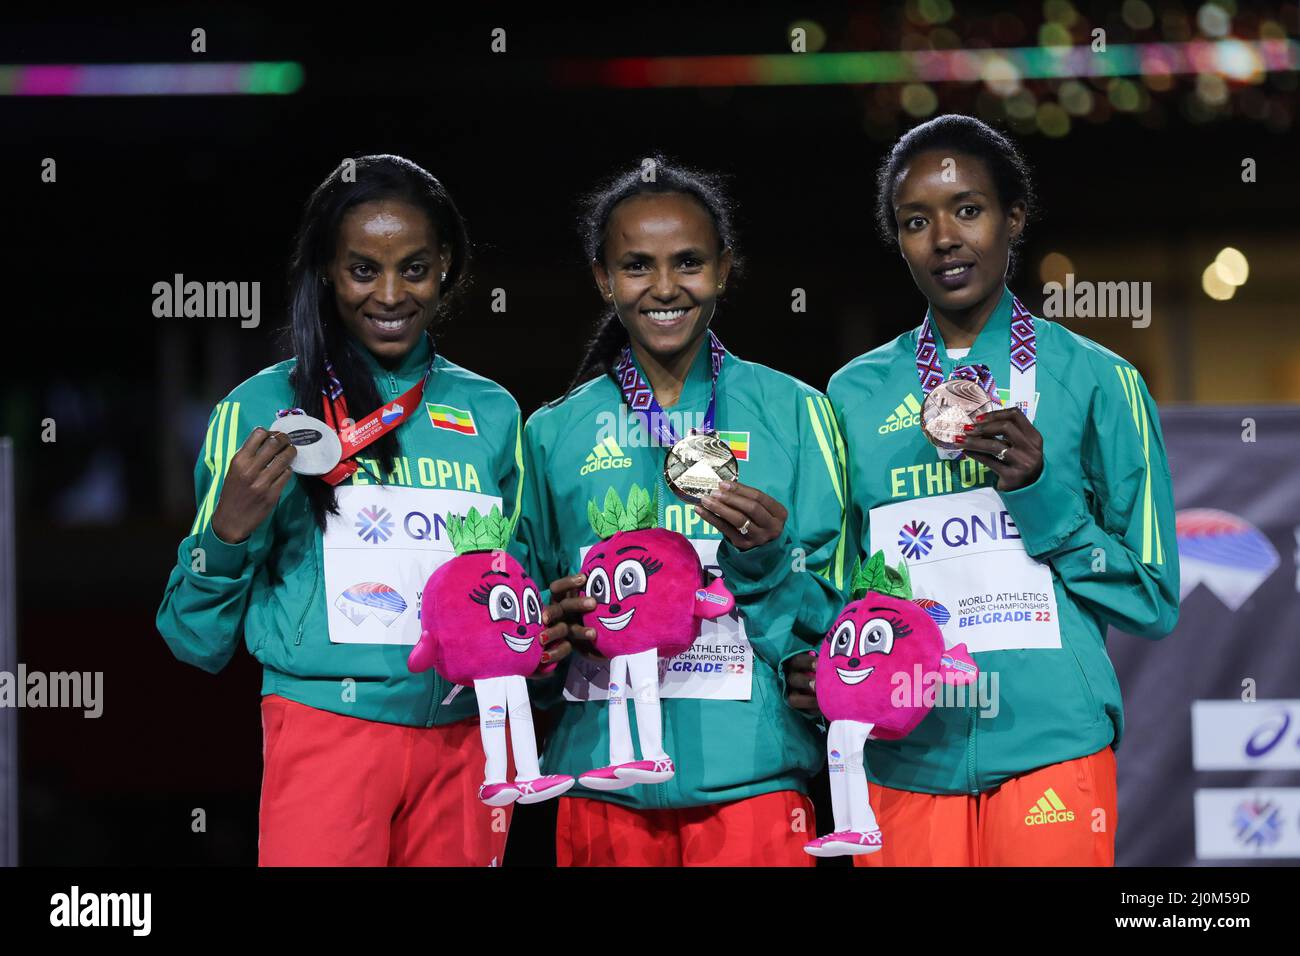 Belgrade, Serbia. 19th Mar, 2022. First-placed Gudaf Tsegay (C), second-placed Axumawit Embaye (L) and third-placed Hirut Meshesha of Ethiopia pose during the awarding ceremony for the women's 1500m event at the World Athletics Indoor Championships Belgrade 2022 in Stark Arena, Belgrade, Serbia, March 19, 2022. Credit: Zheng Huansong/Xinhua/Alamy Live News Stock Photo